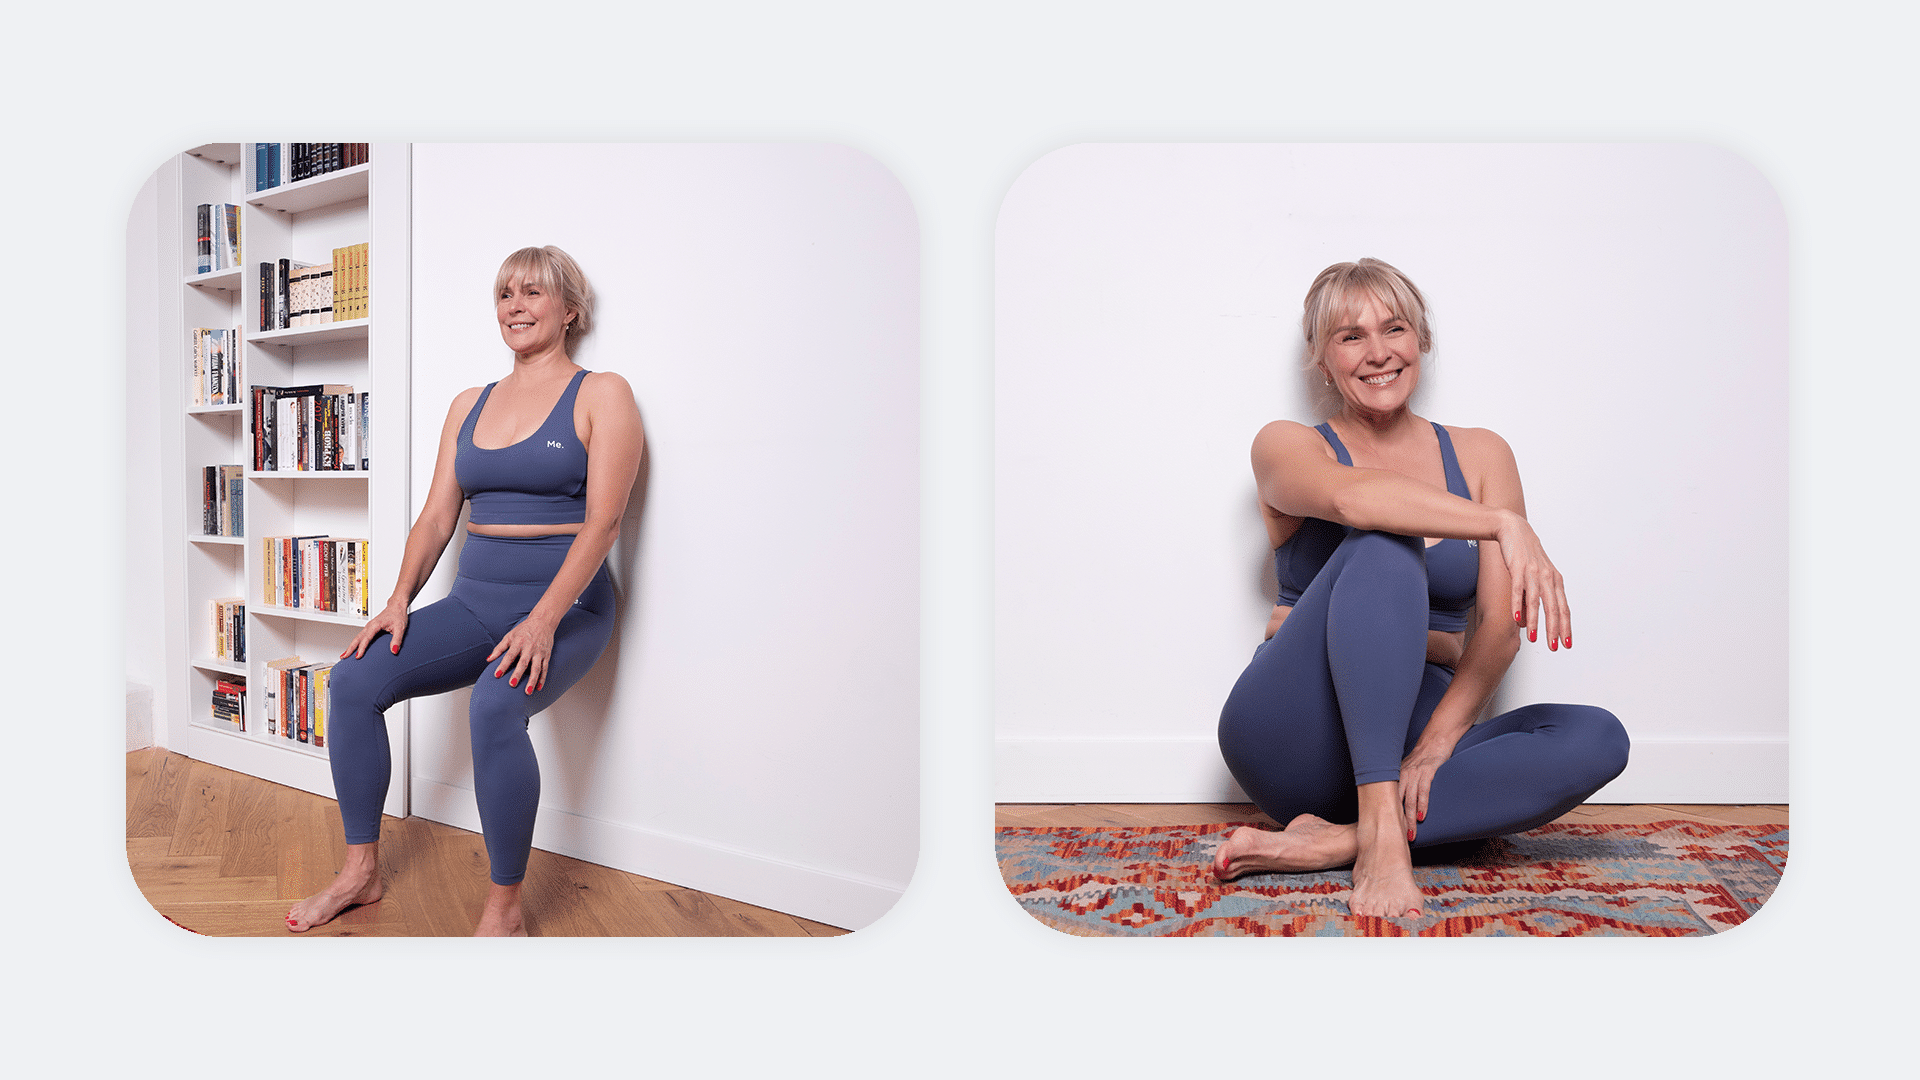 30 Day Wall Pilates Challenge Printable Wall Stretch Fitness Quick